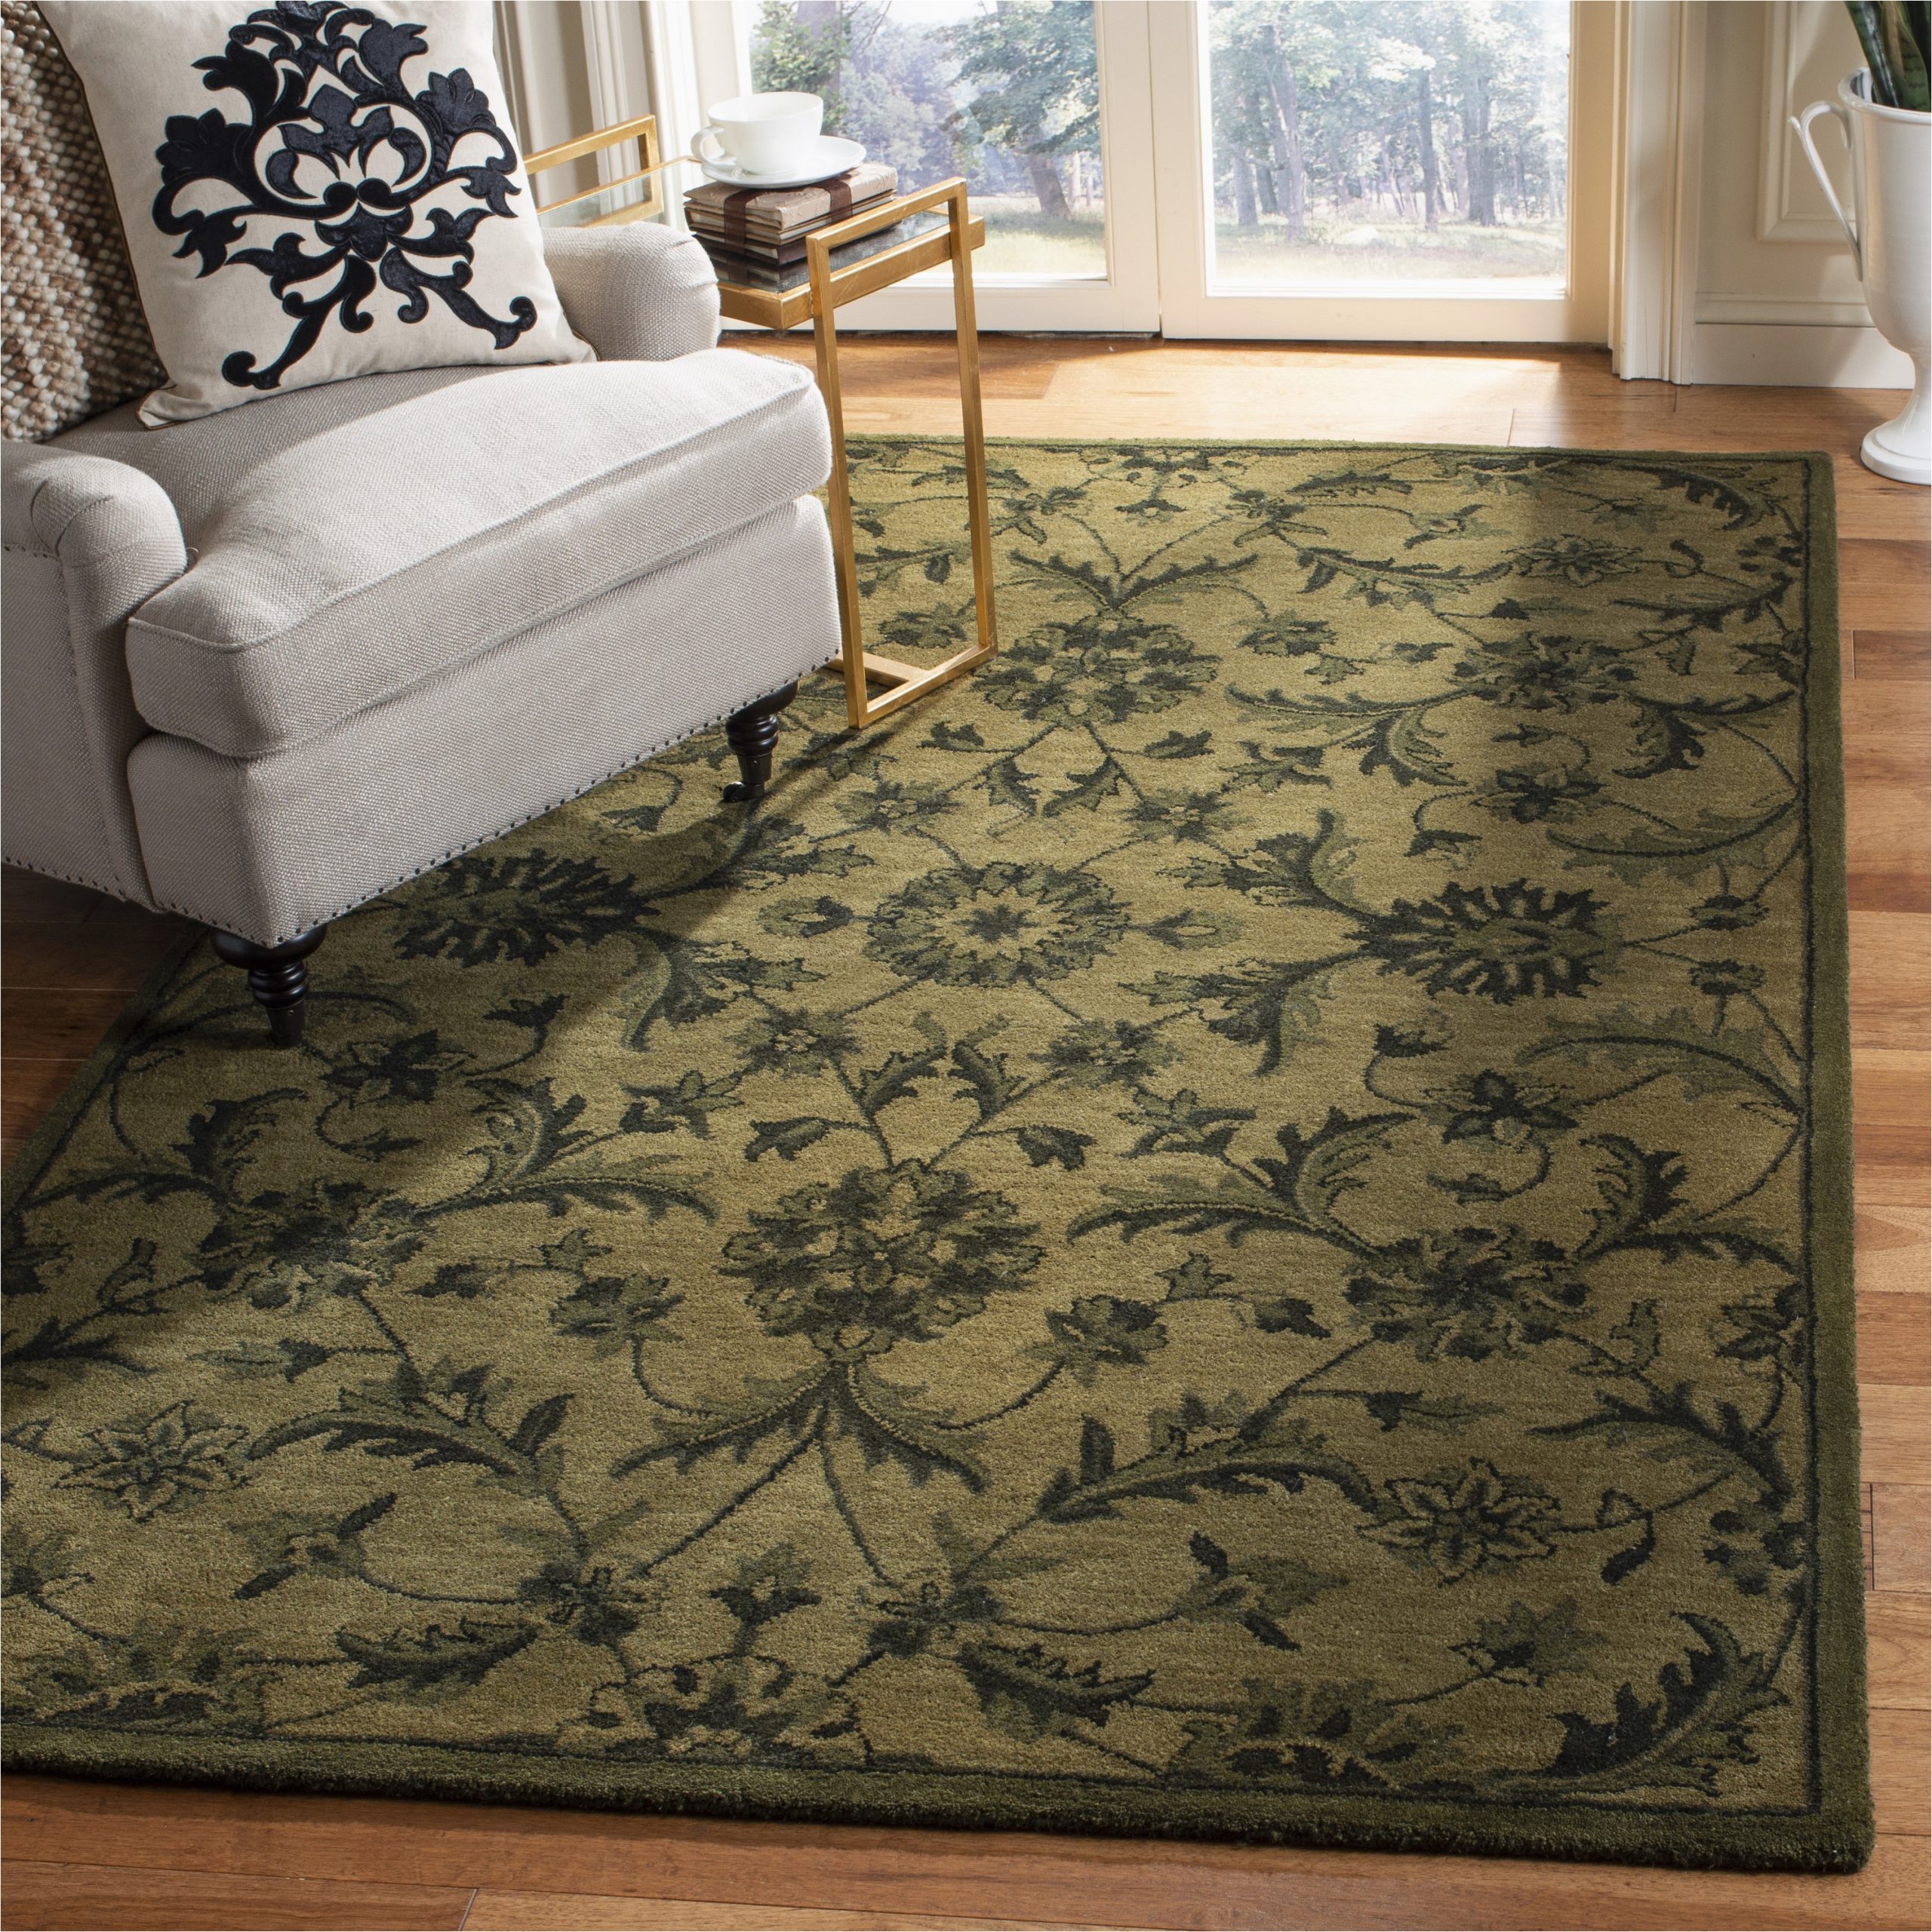 Beige and Green area Rugs 8×10 Safavieh Antiquity tousher 8 X 10 Wool Olive/green Indoor Floral/botanical Vintage area Rug